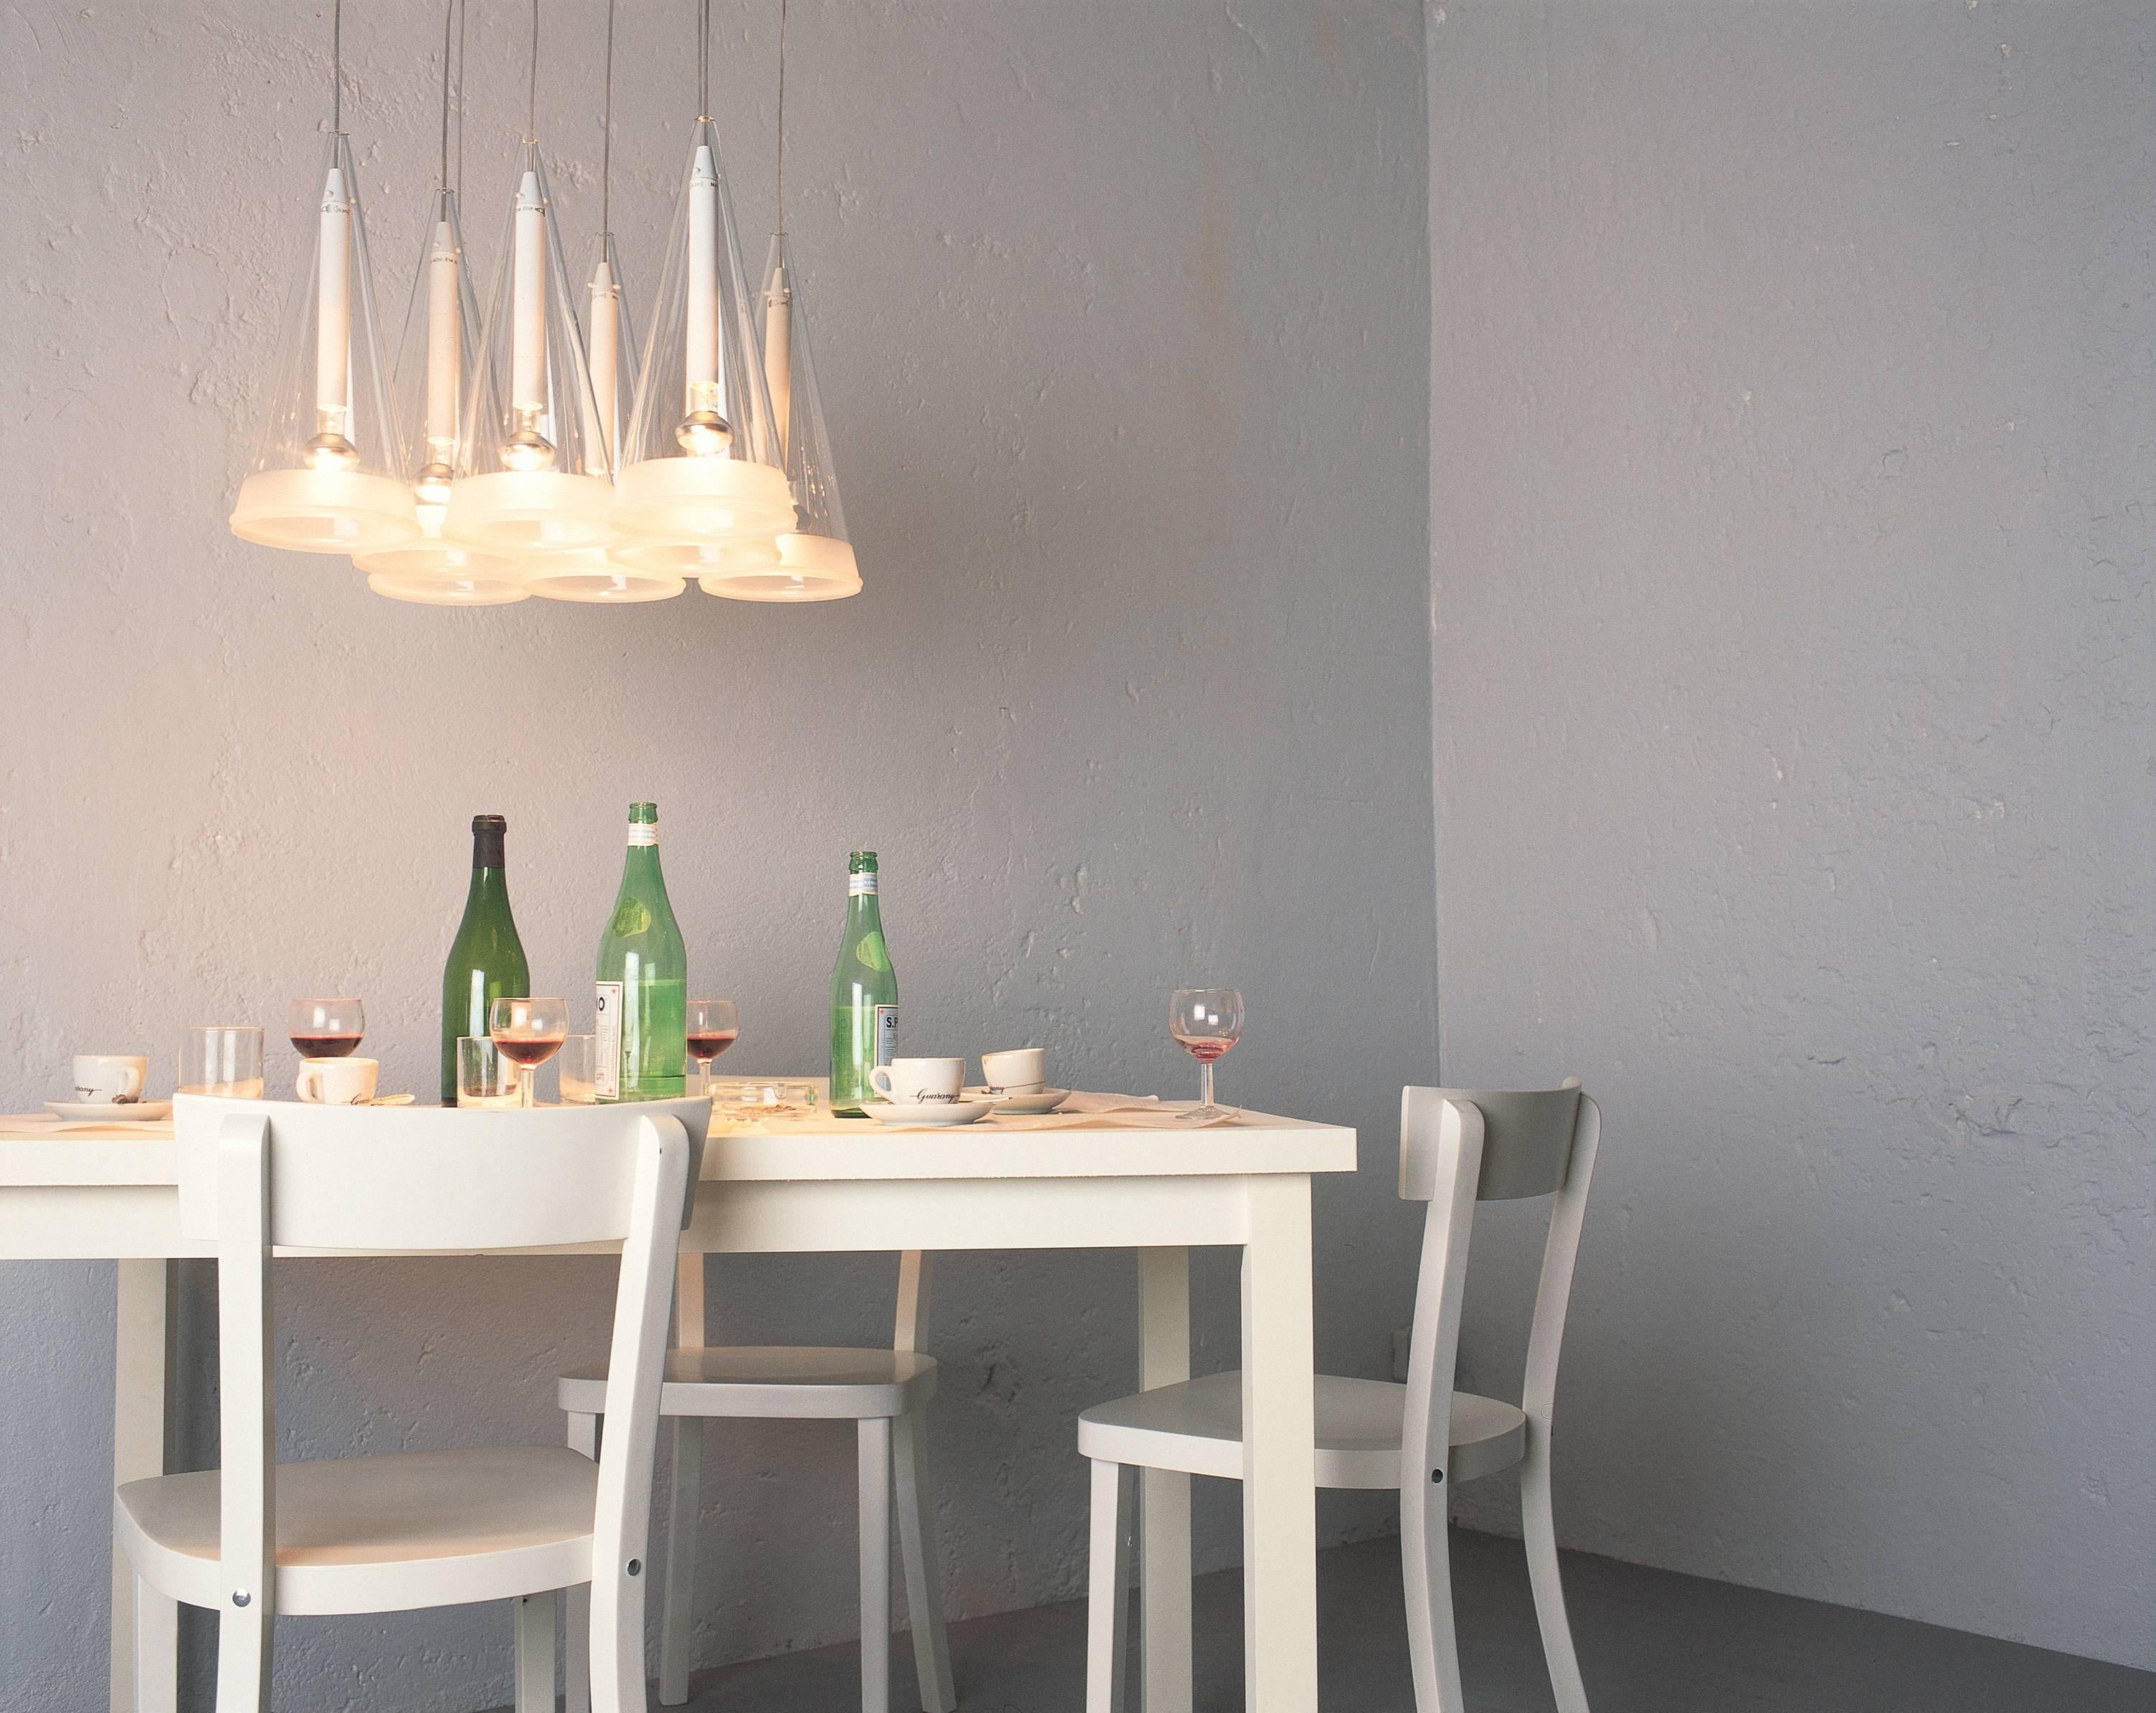 Part of the Fucsia family by Achille Castiglioni, this eight-cone configuration shares the industrial style and sophisticated finish of its kin. Offering direct and diffused light, each conical blown glass diffuser is finished with a 1.5